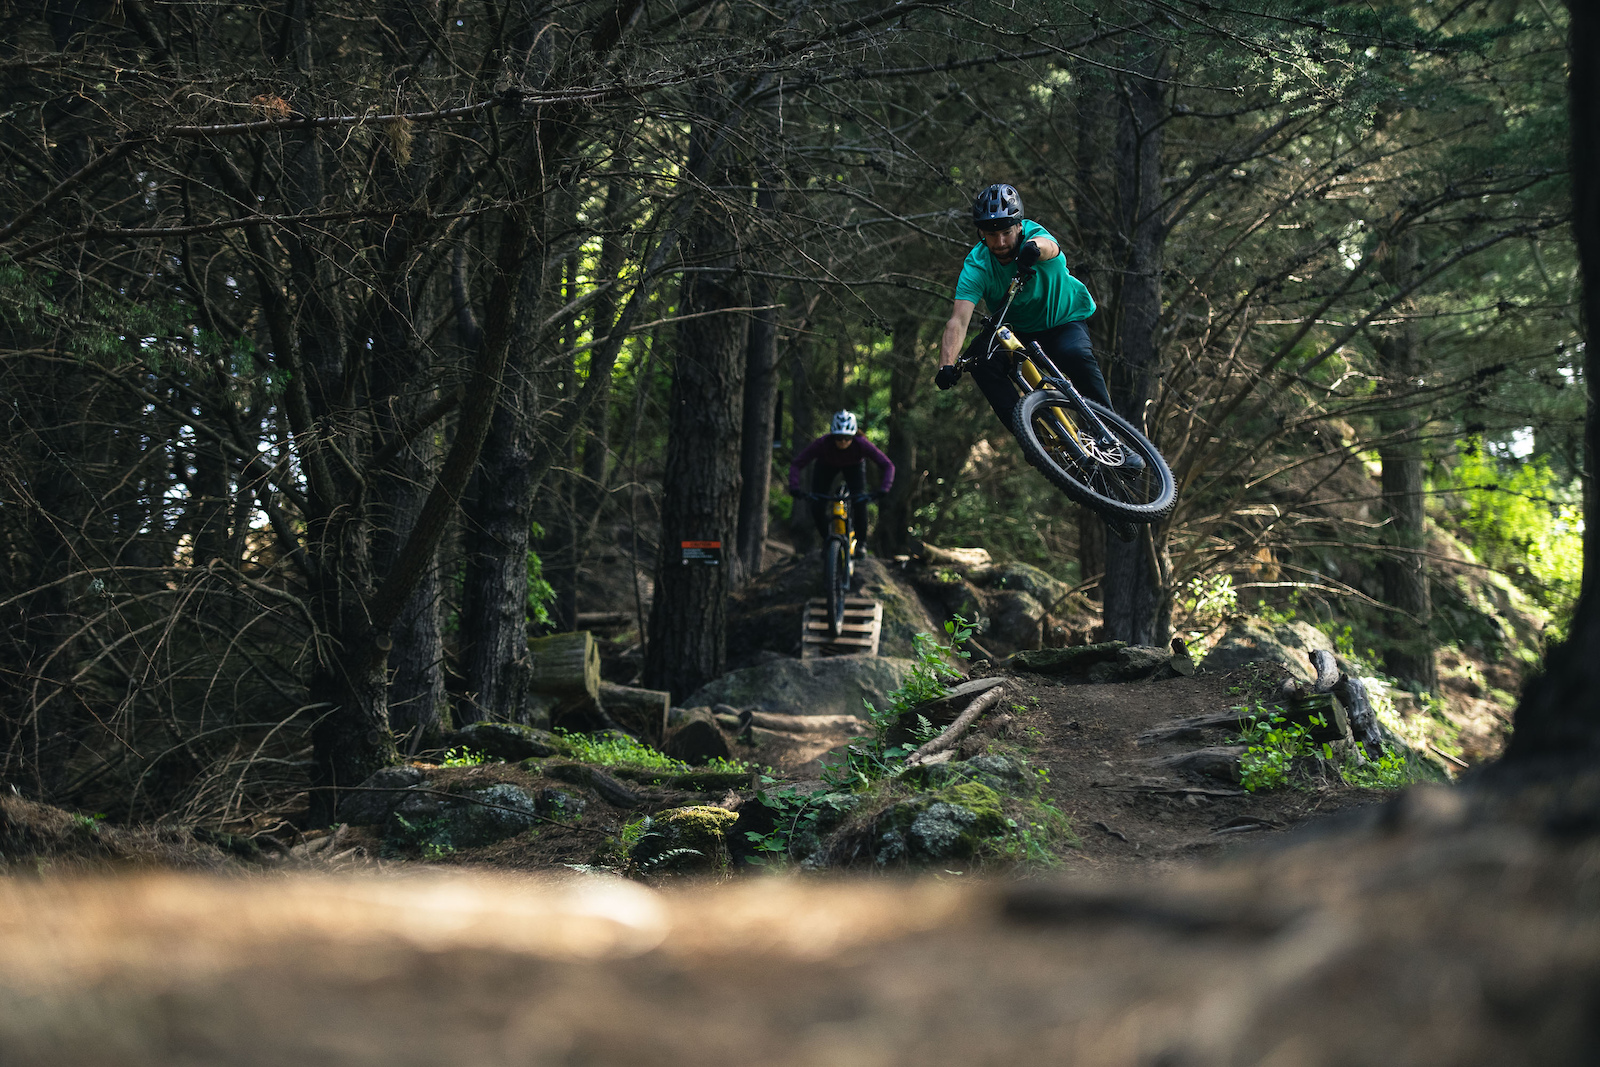 These trails are packed with fun little features.